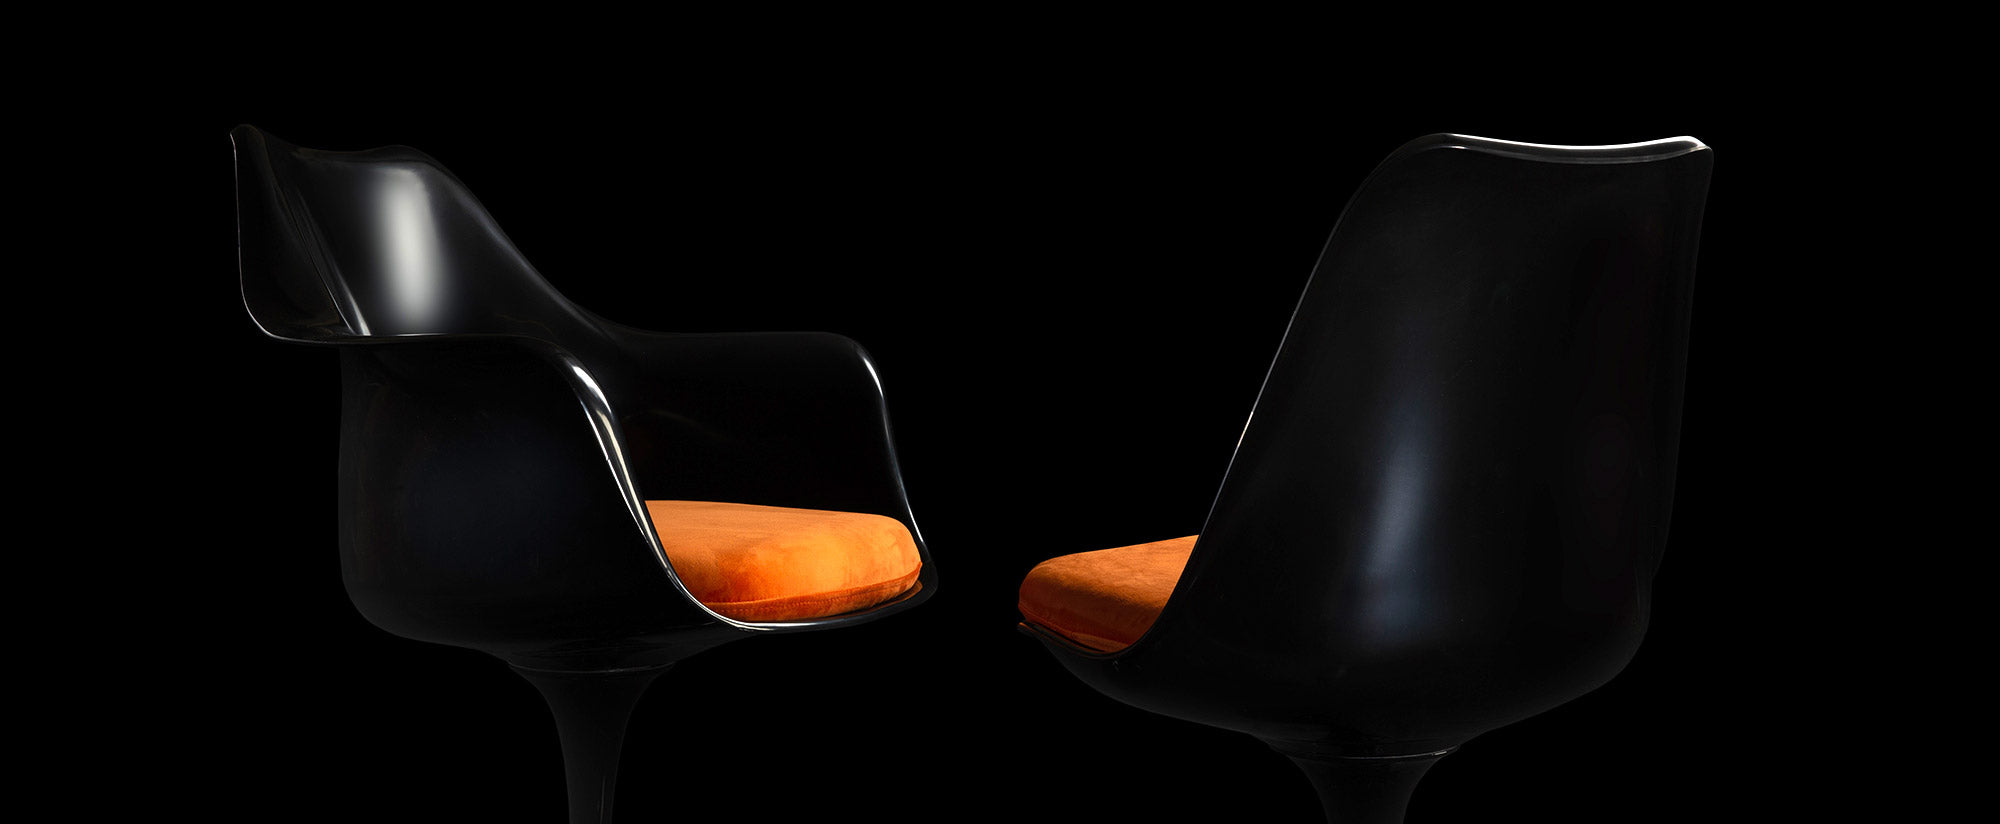 With a special mood and minimal lighting, a black Tulip Side and Arm chair can be seen as a silhouette & a splash of orange form the cushions